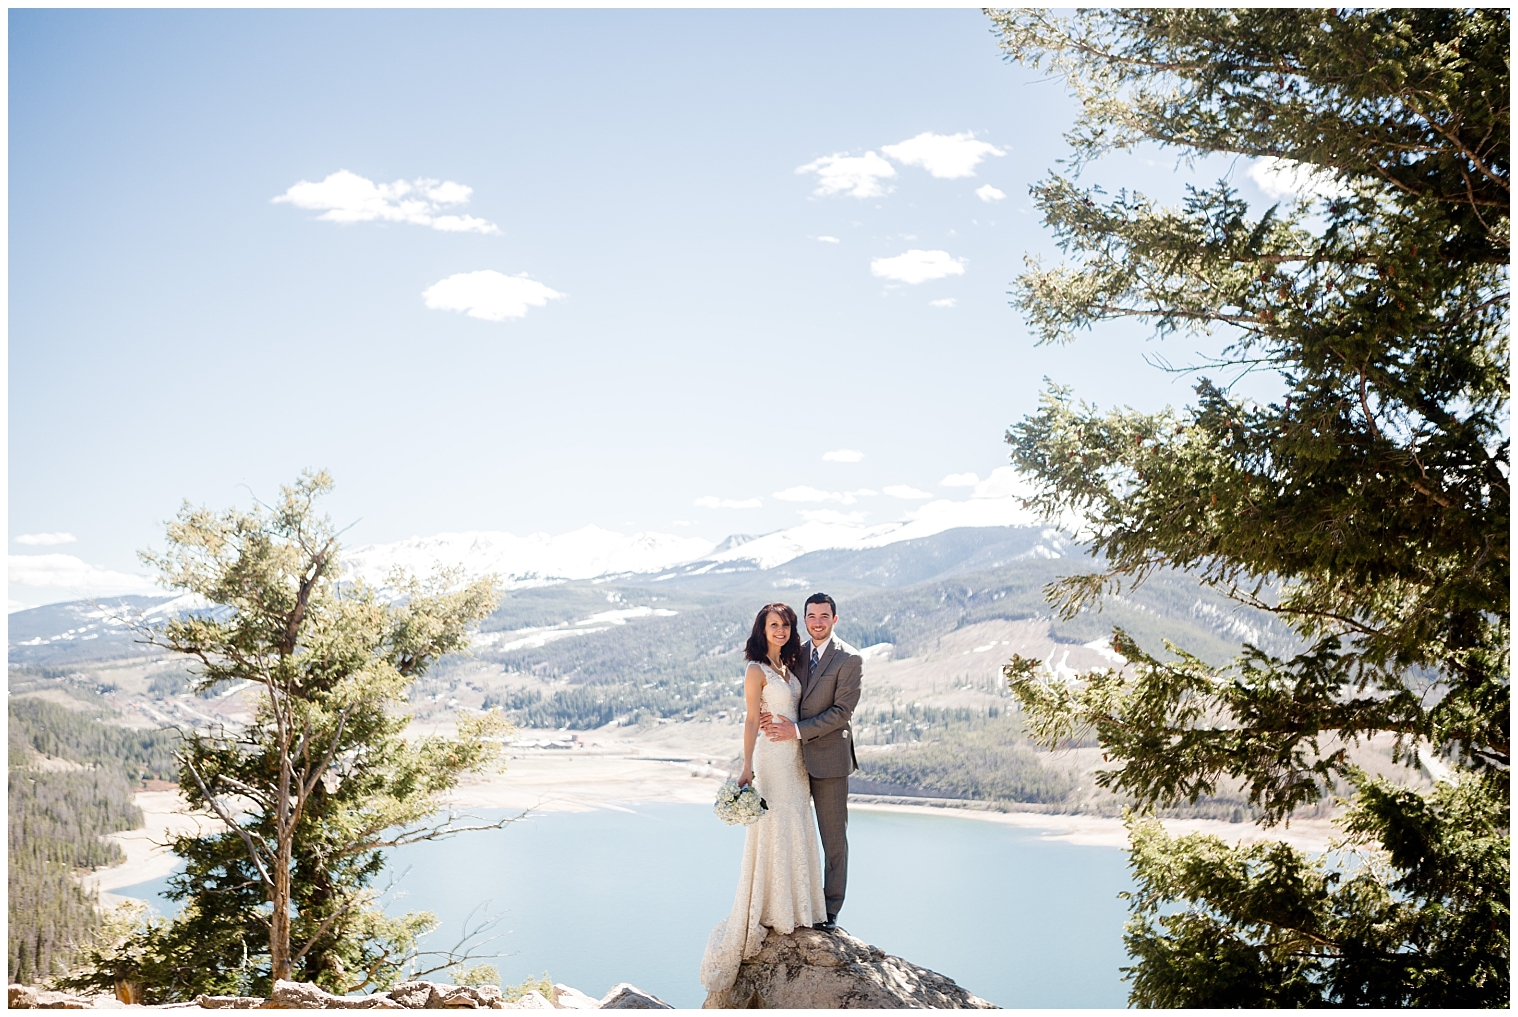 Couple pose together at Sapphire Point Overlook during their Breckenridge elopement photography